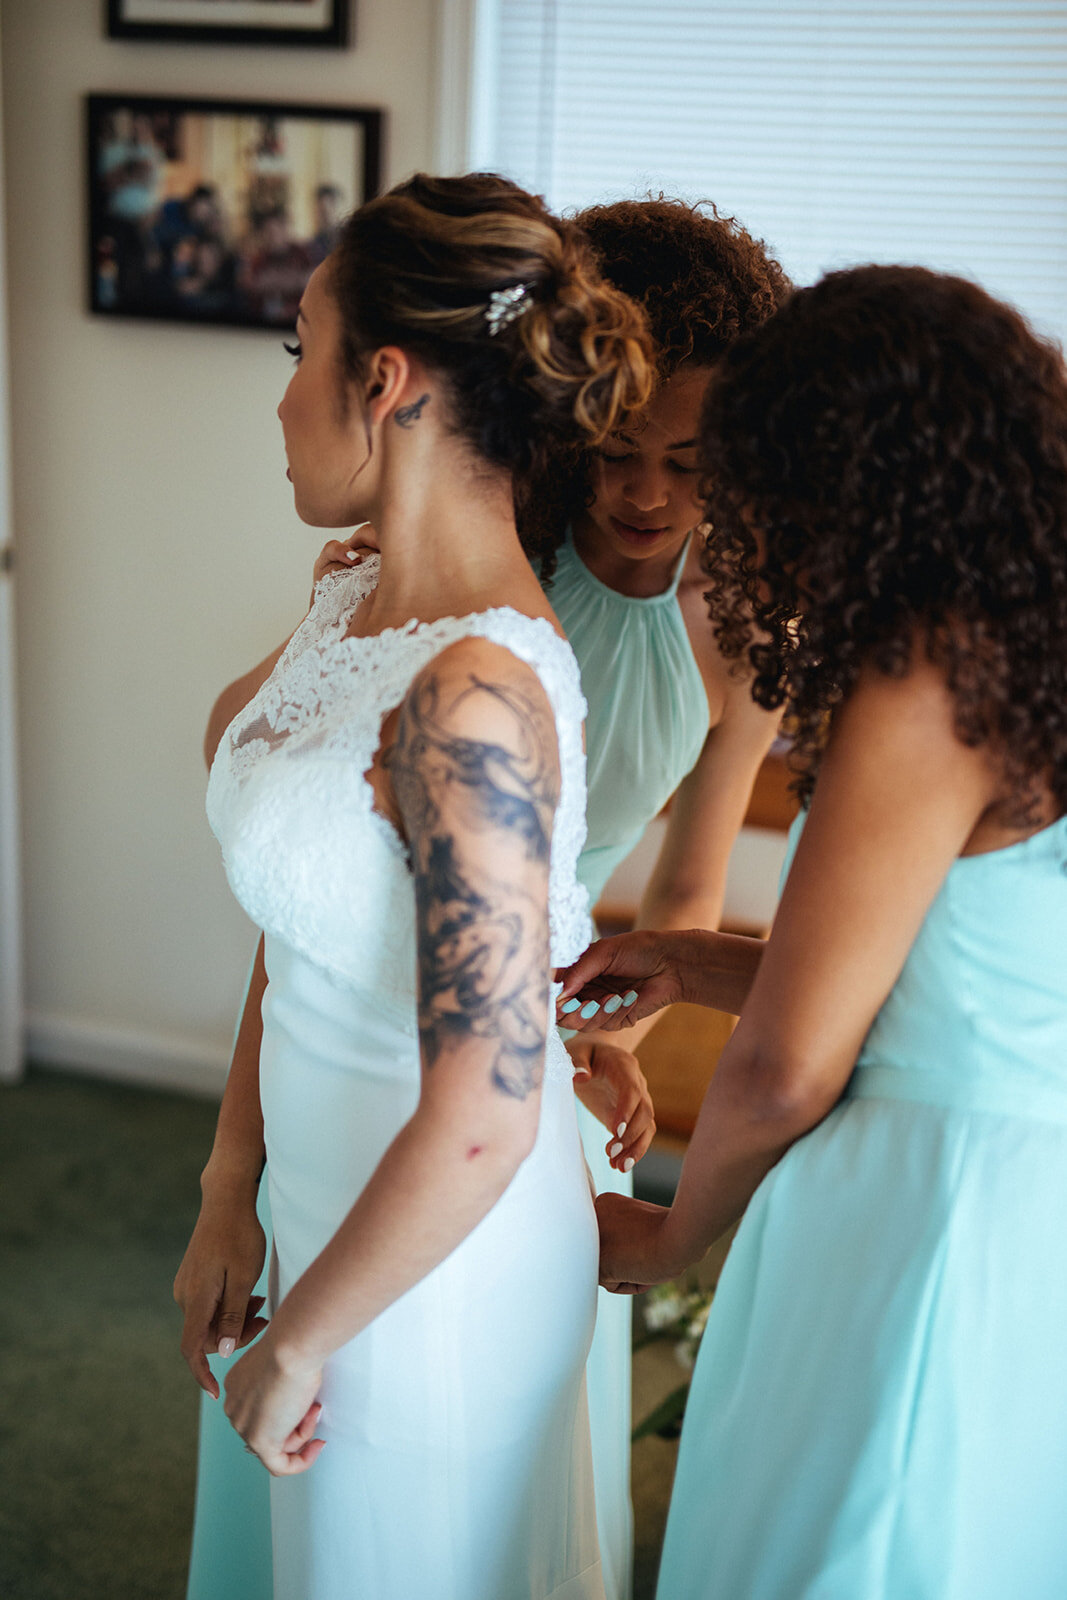 Bridesmaids helping bride into her wedding dress in Annapolis MD Shawnee Custalow Photography